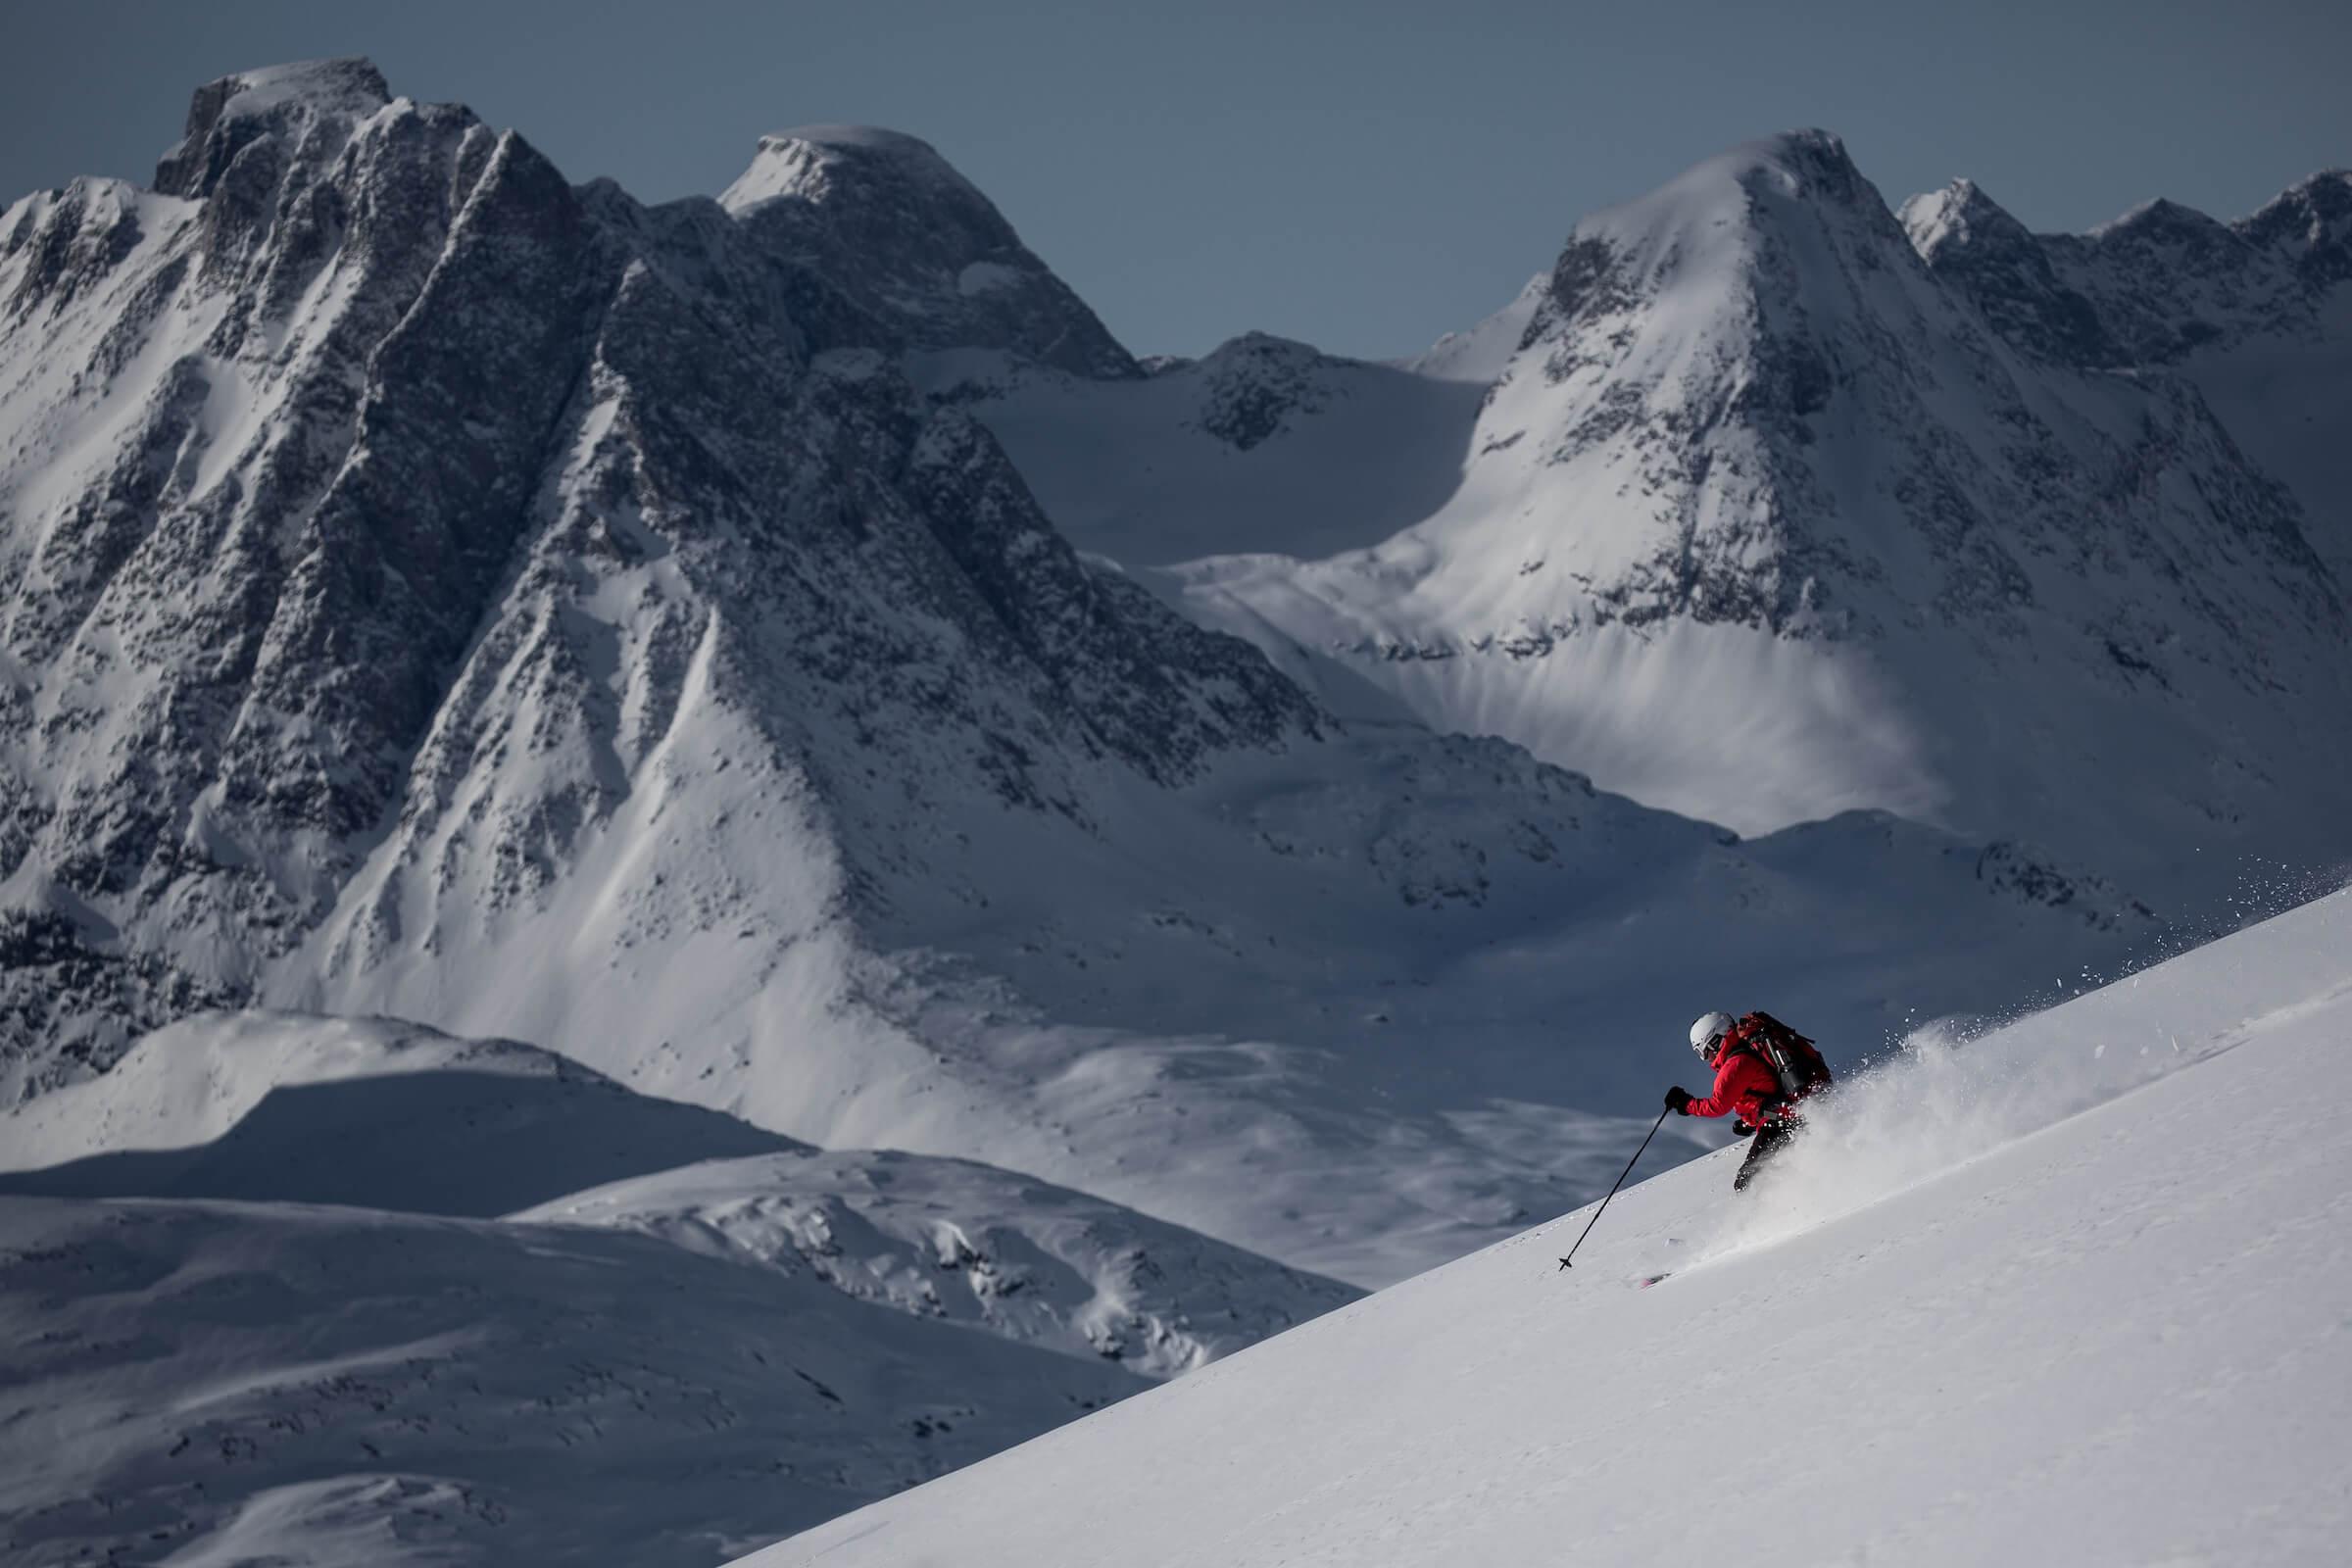 Ski Touring - an active backcountry experience